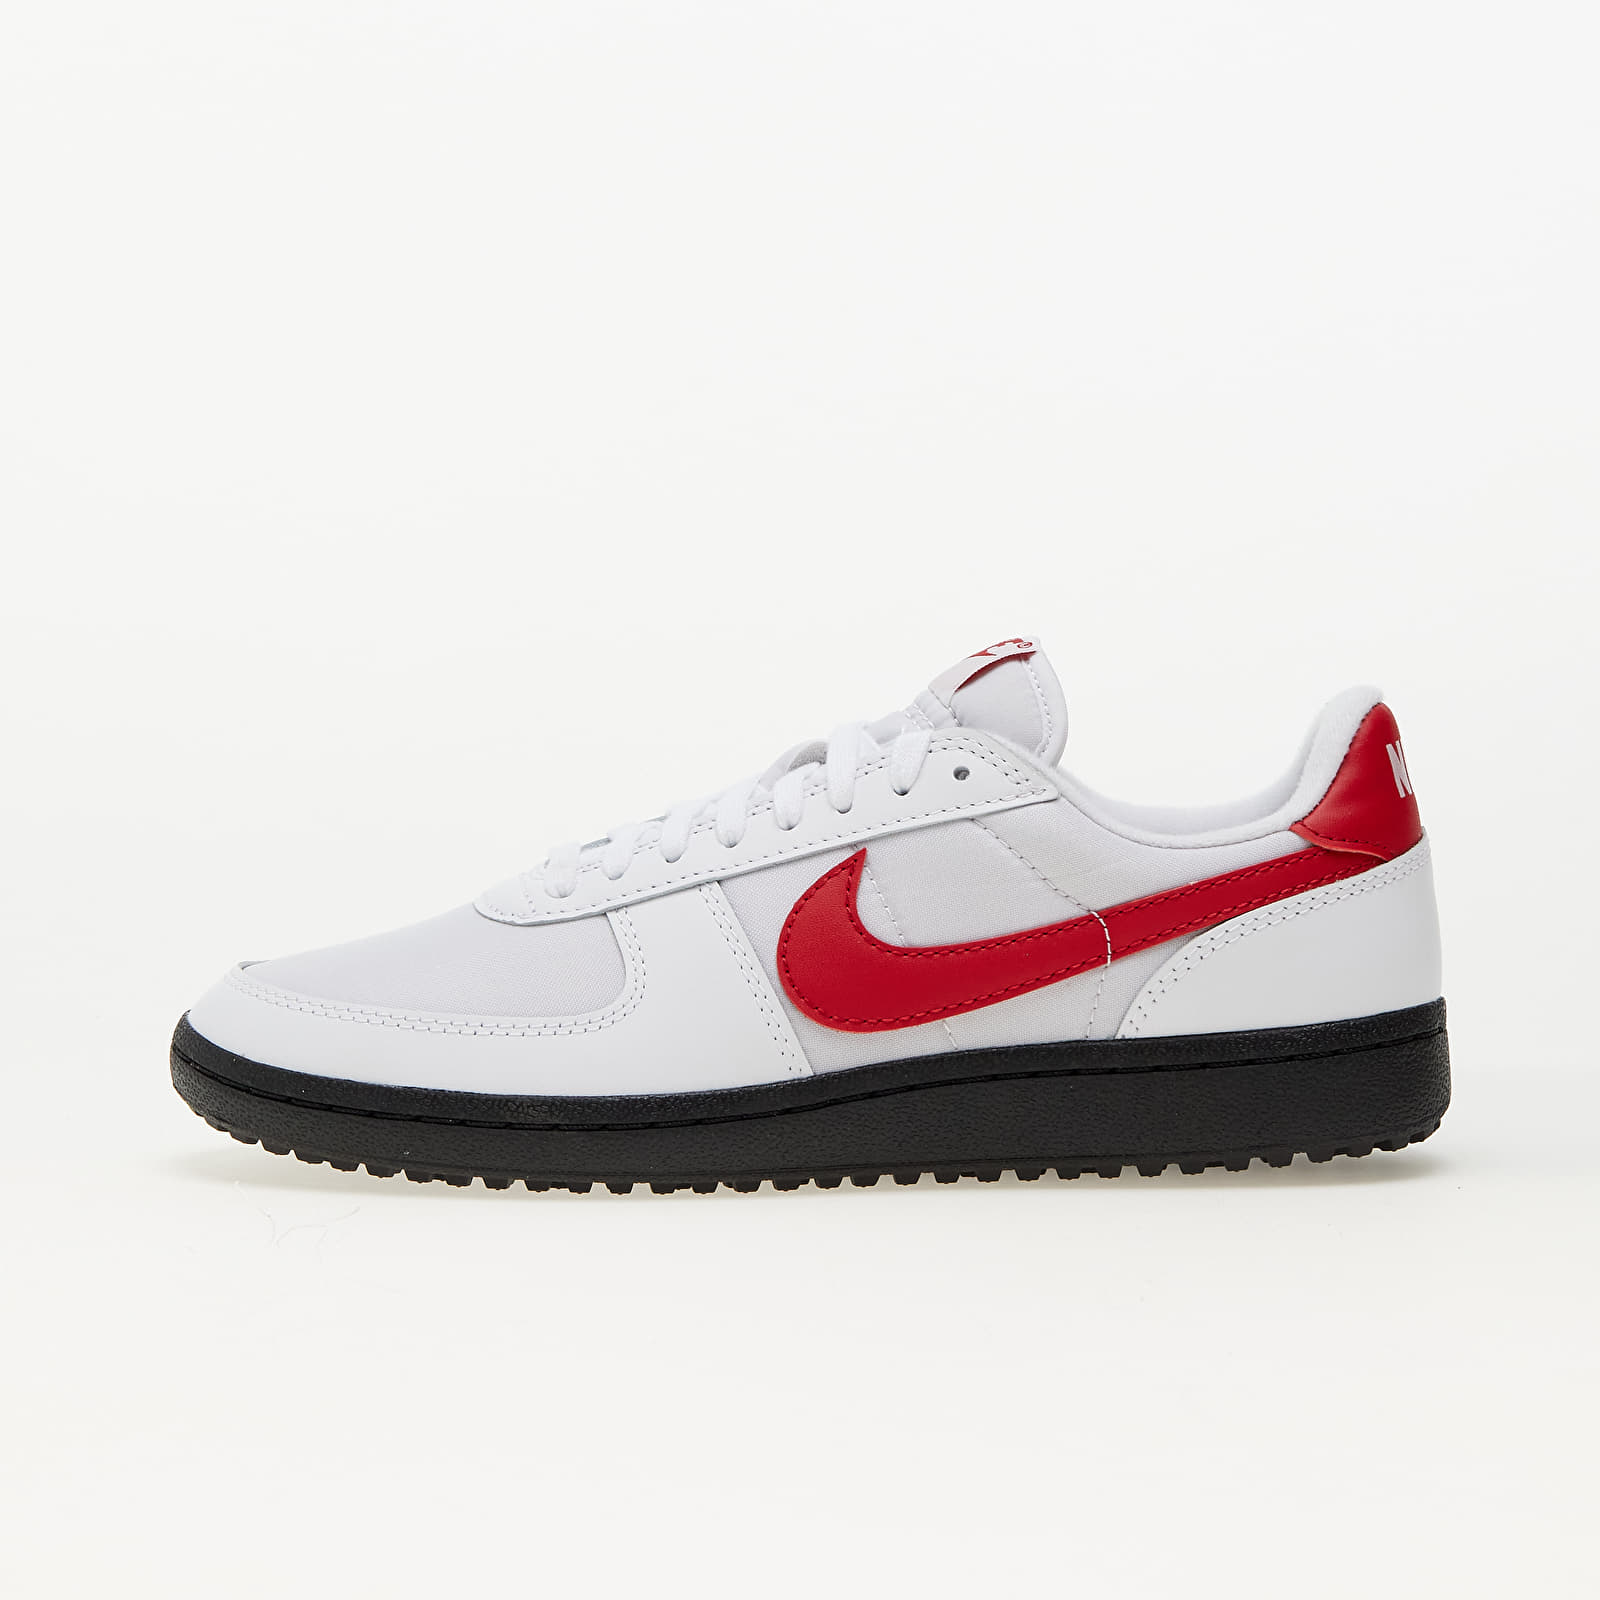 Baskets et chaussures pour hommes Nike Field General 82 Sp White/ Varsity Red-Black